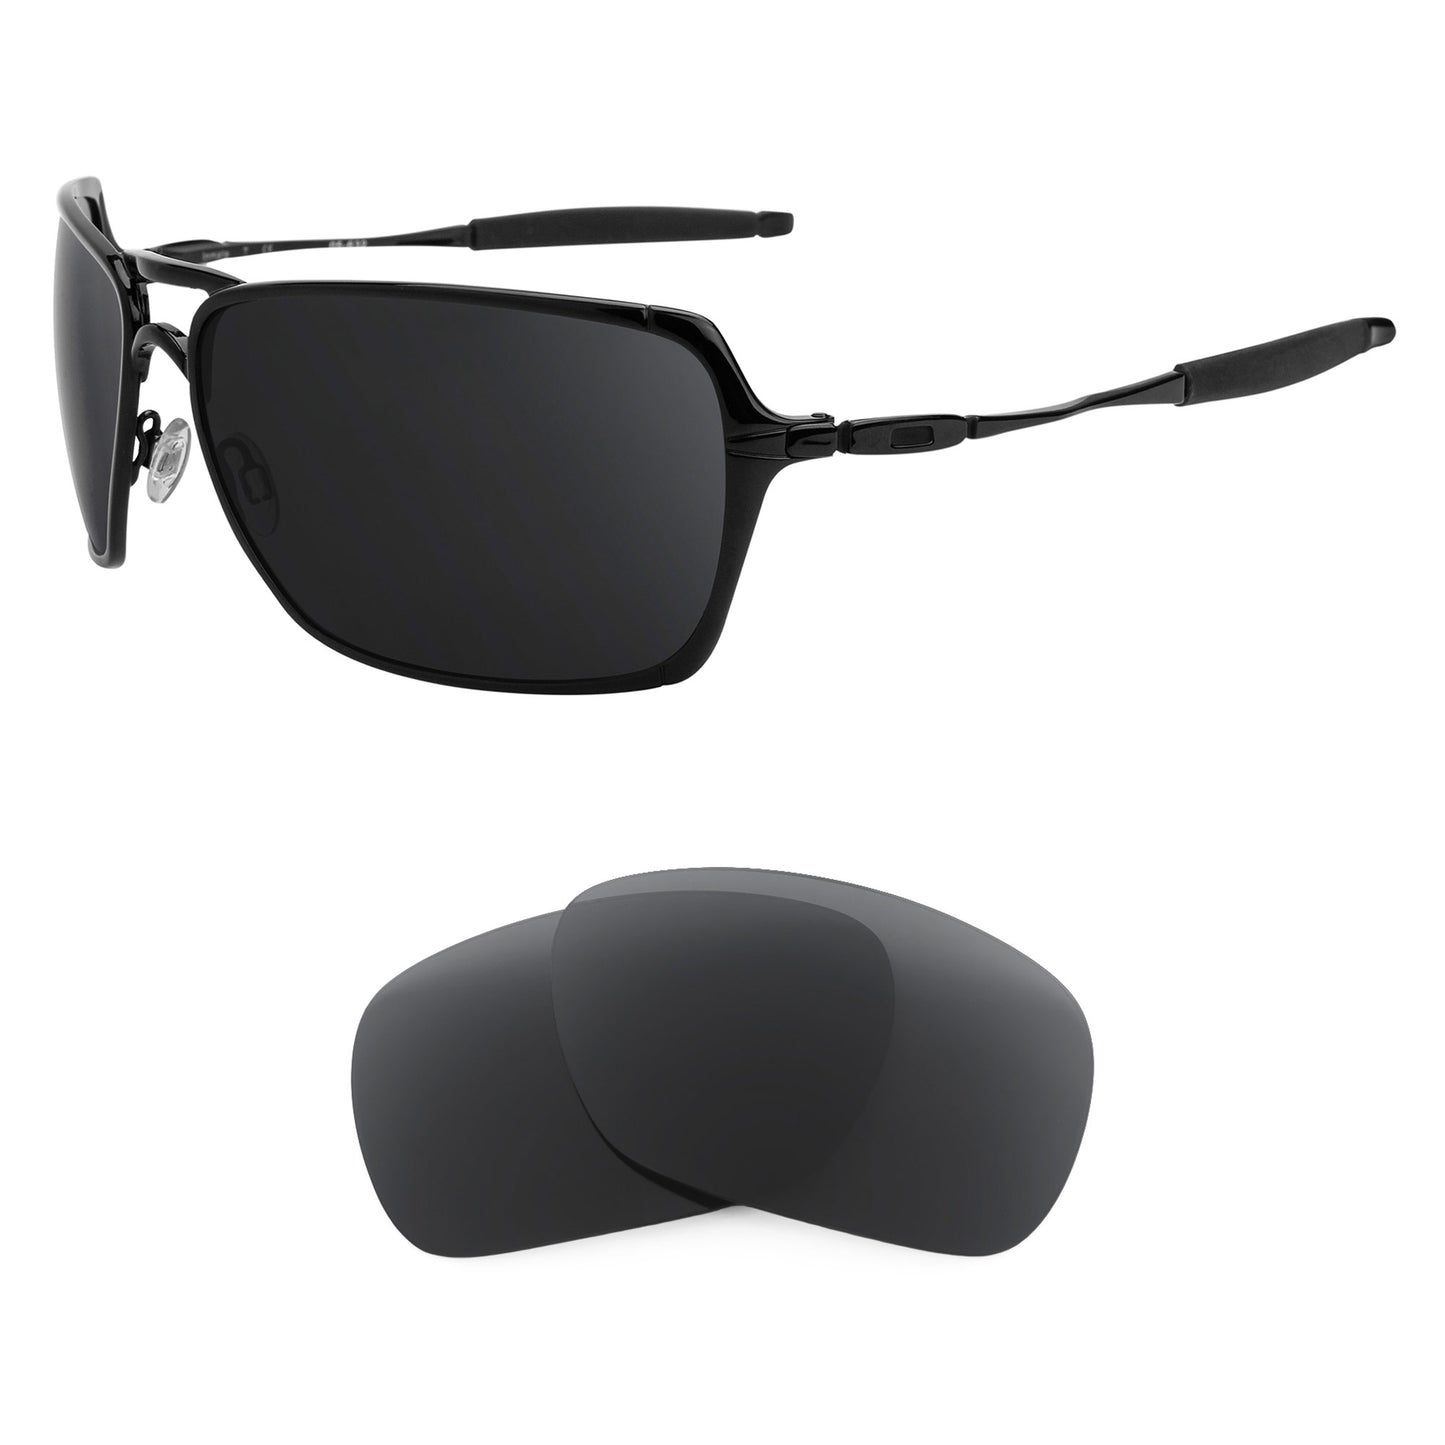 Oakley Inmate sunglasses with replacement lenses